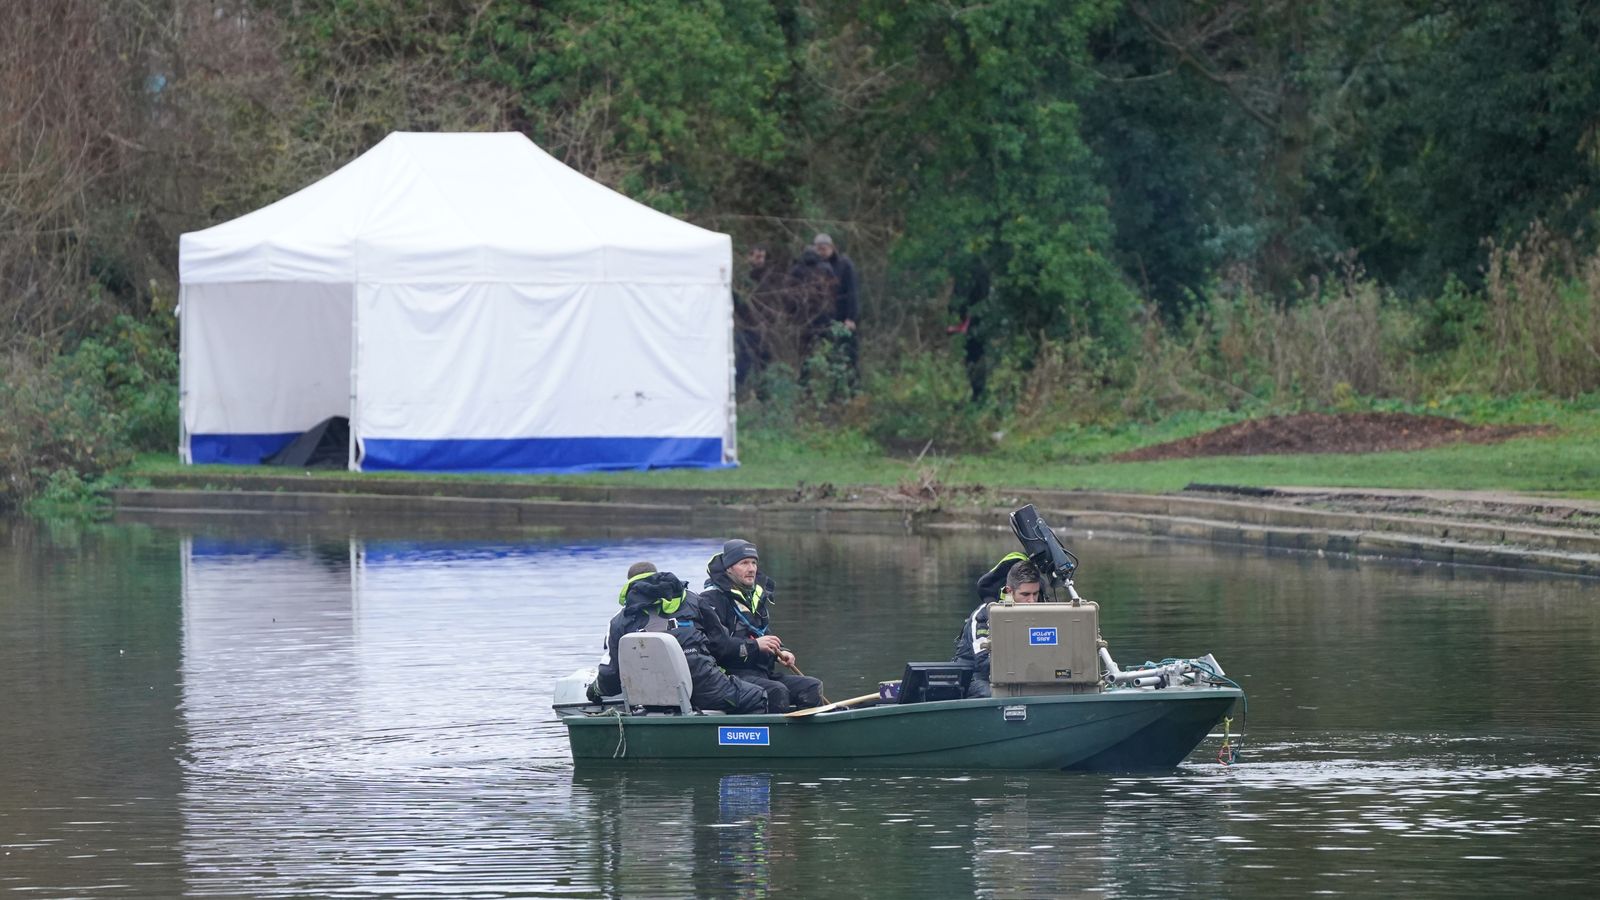 Gaynor Lord: Police searching river for missing mother a week after disappearance